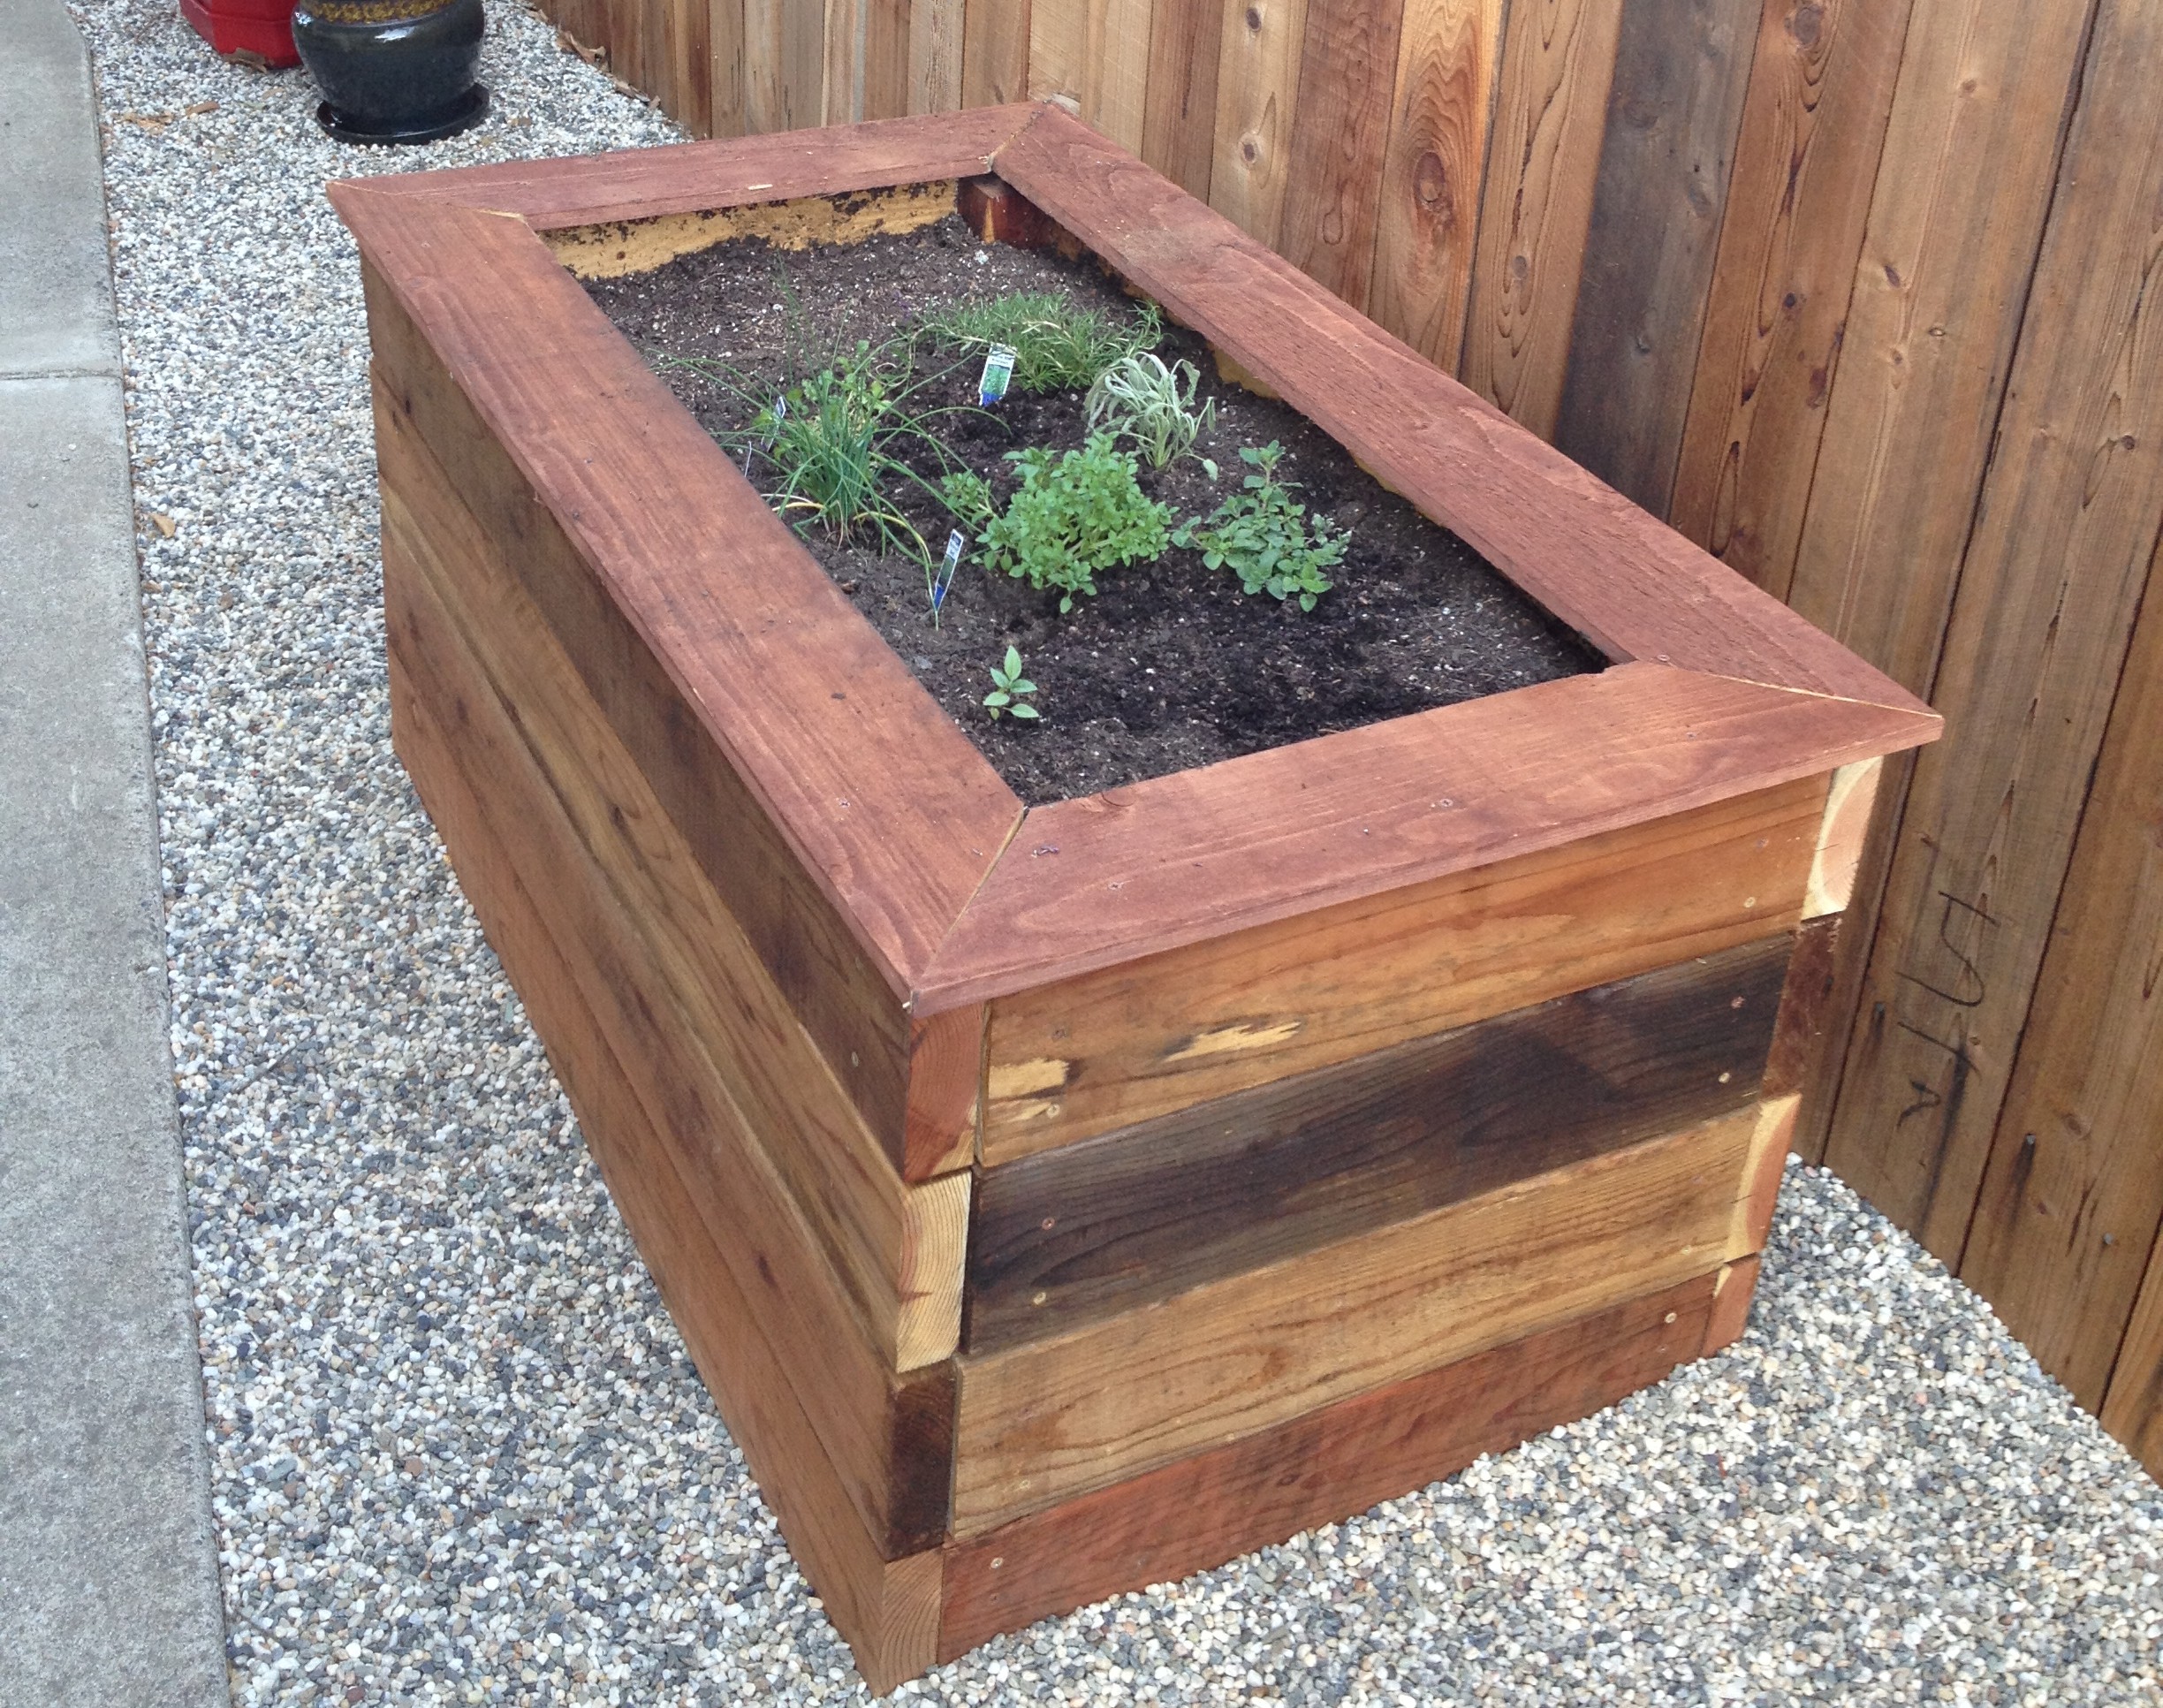 Woodworking Plans How To Make Wooden Planter Boxes PDF Plans